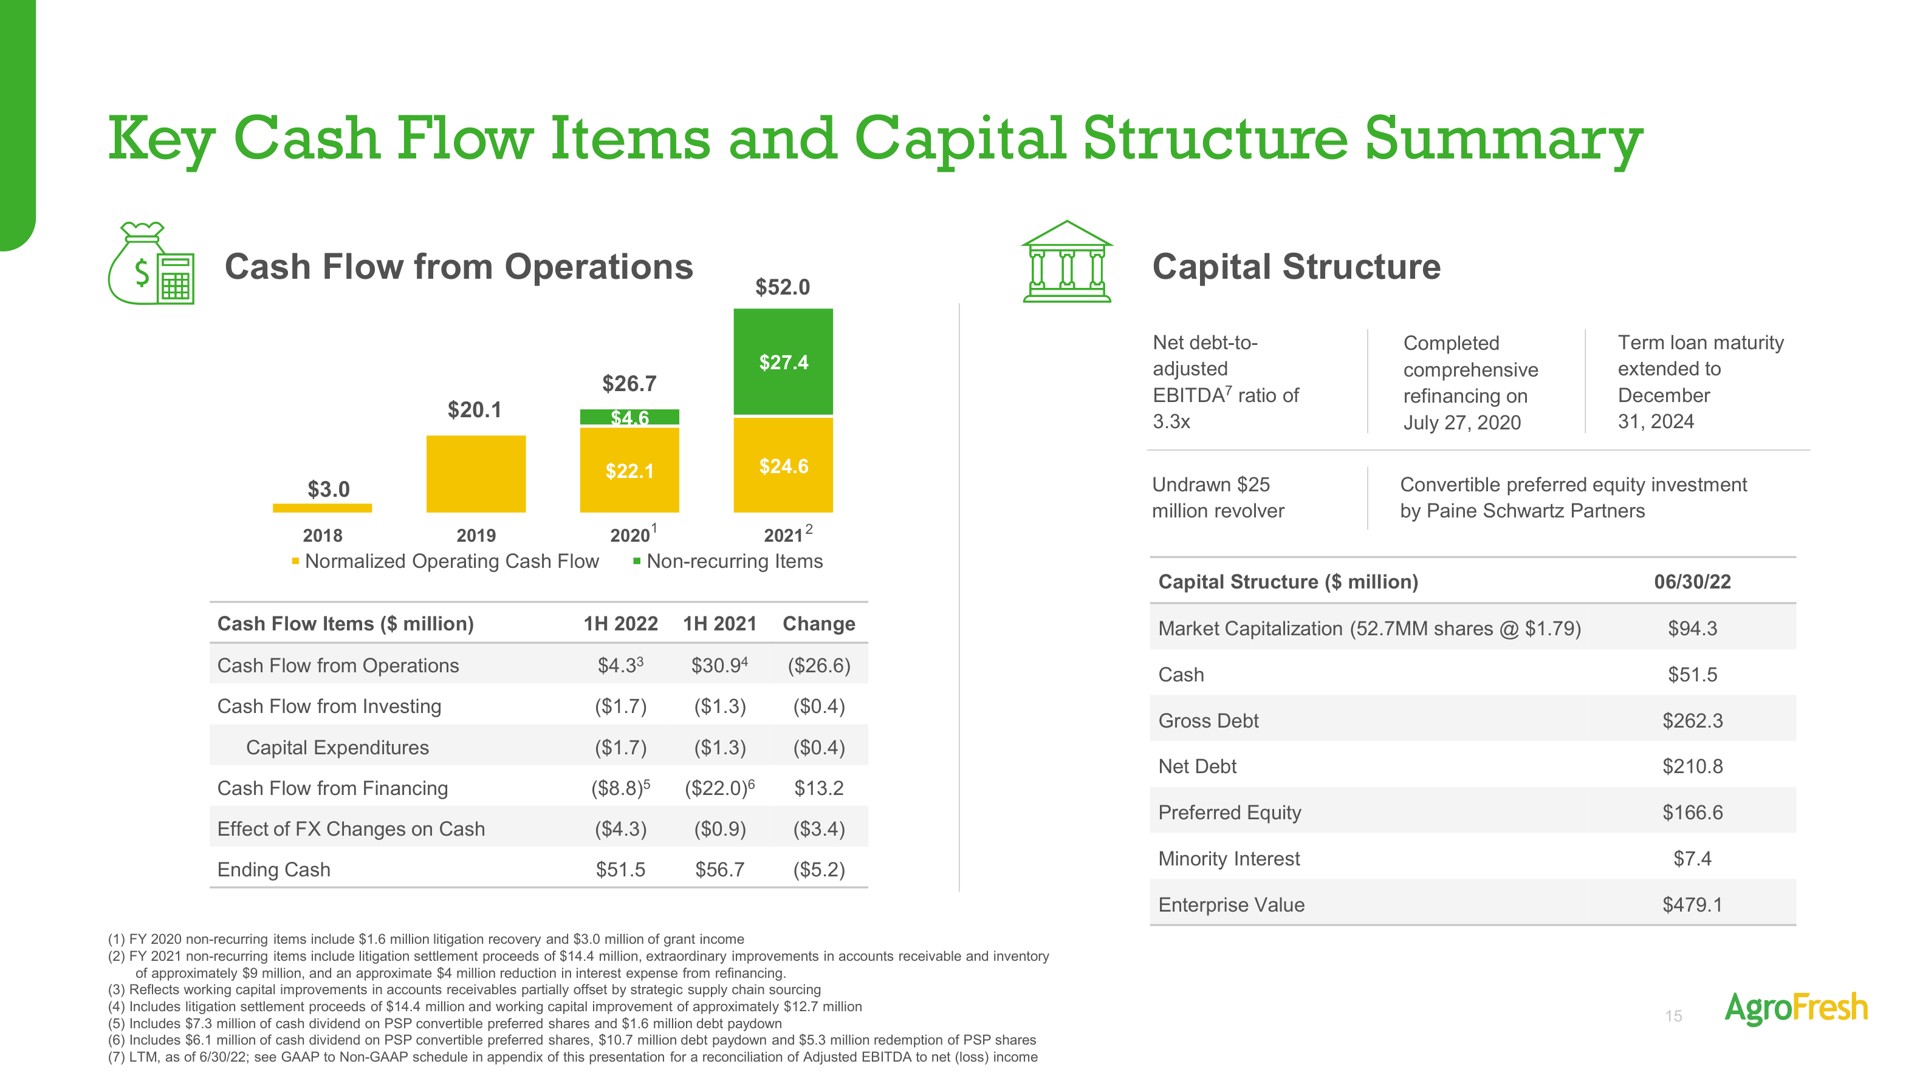 key cash flow items and capital structure summary from operations | AgroFresh